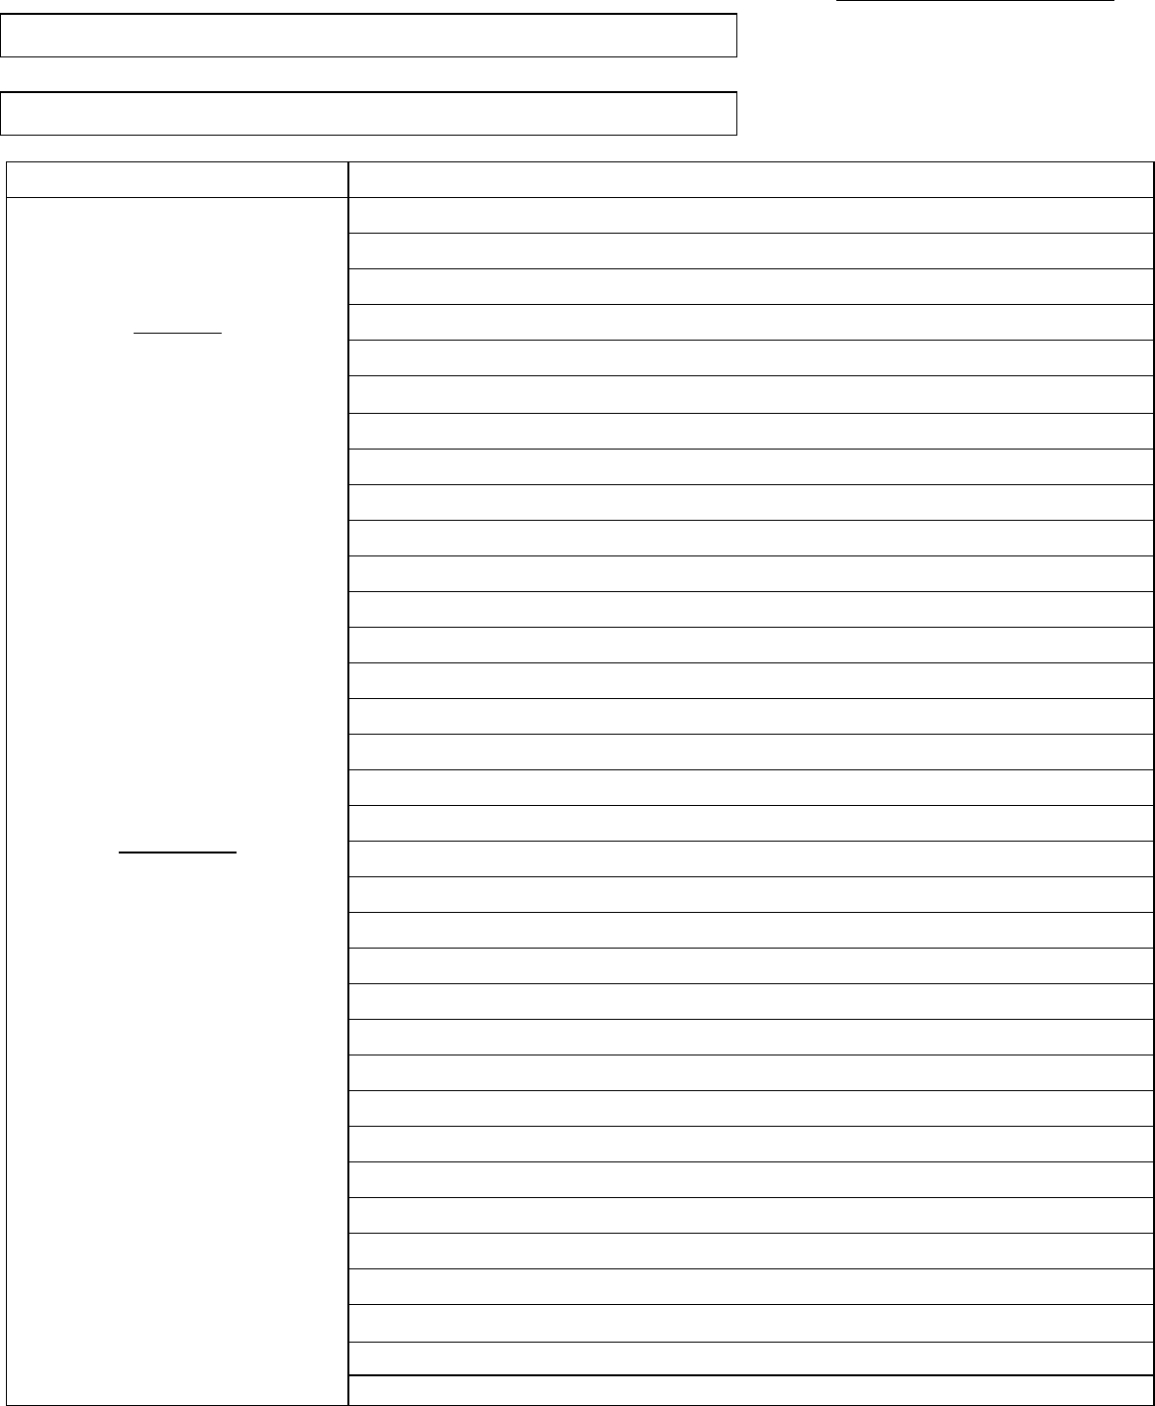 Cornell Notes Template In Word And Pdf Formats Intended For Cornell Note Template Word